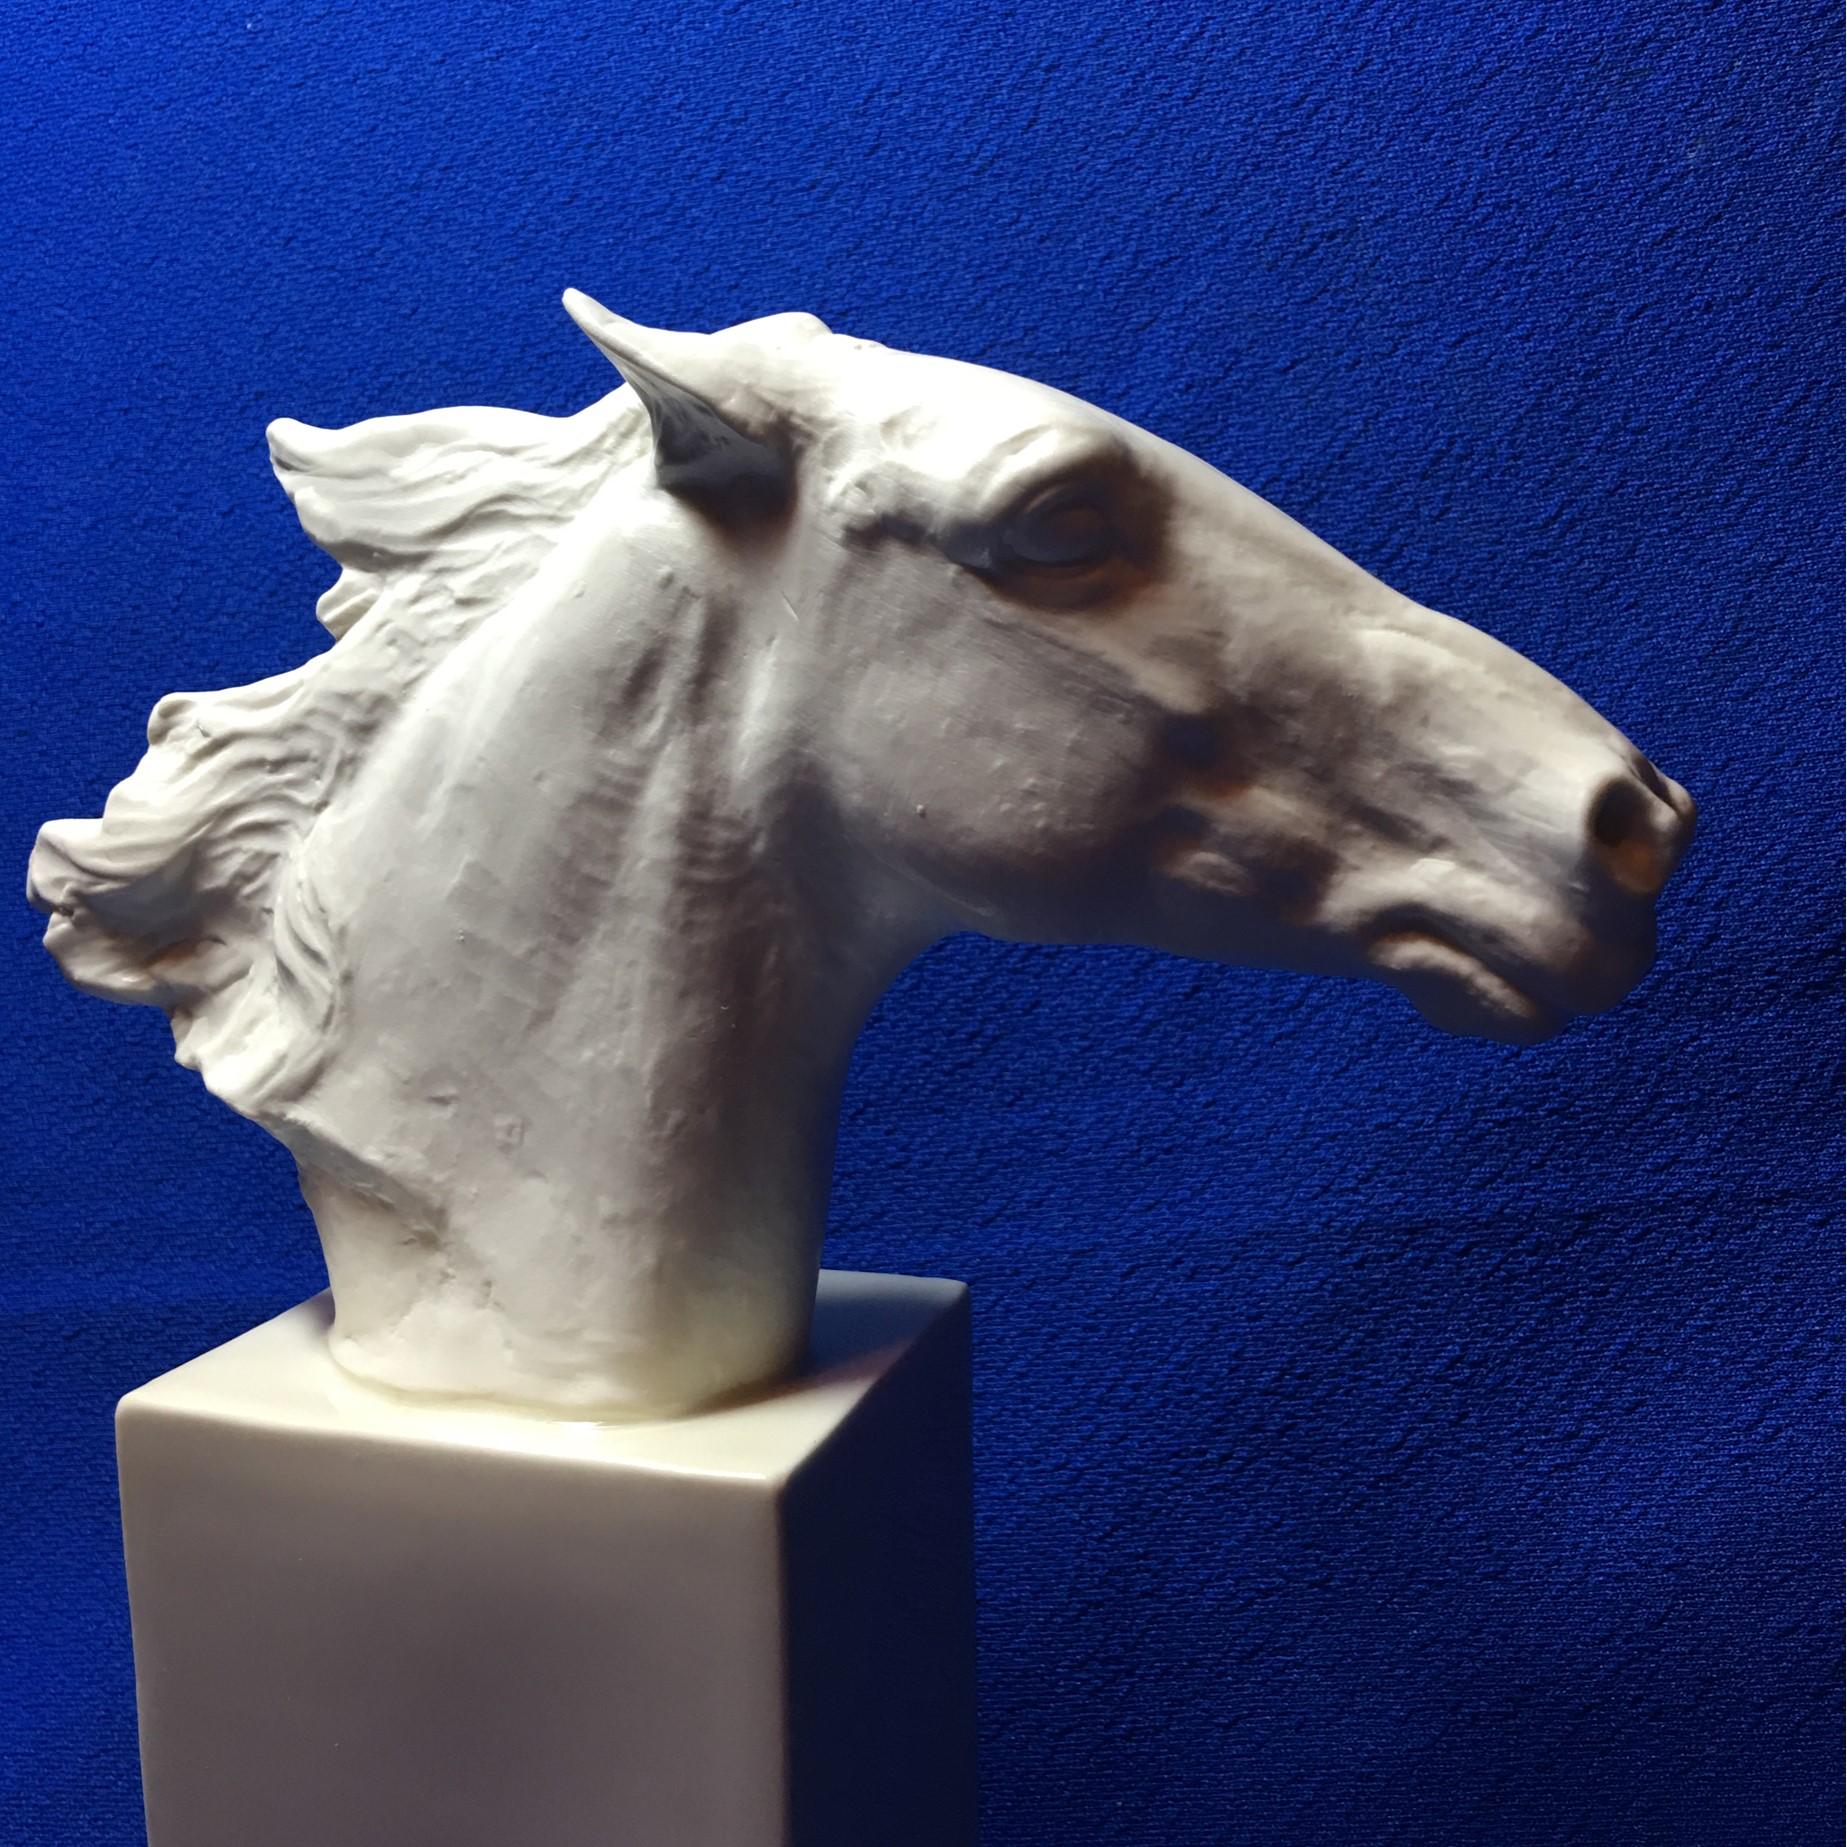 A beautiful horse head statue made of matted porcelain attached to a glazed porcelain pedestal. Designed and crafted between 1935 and 1953. Designed by Albert Hinrich Hussman a German artist who was awarded the 